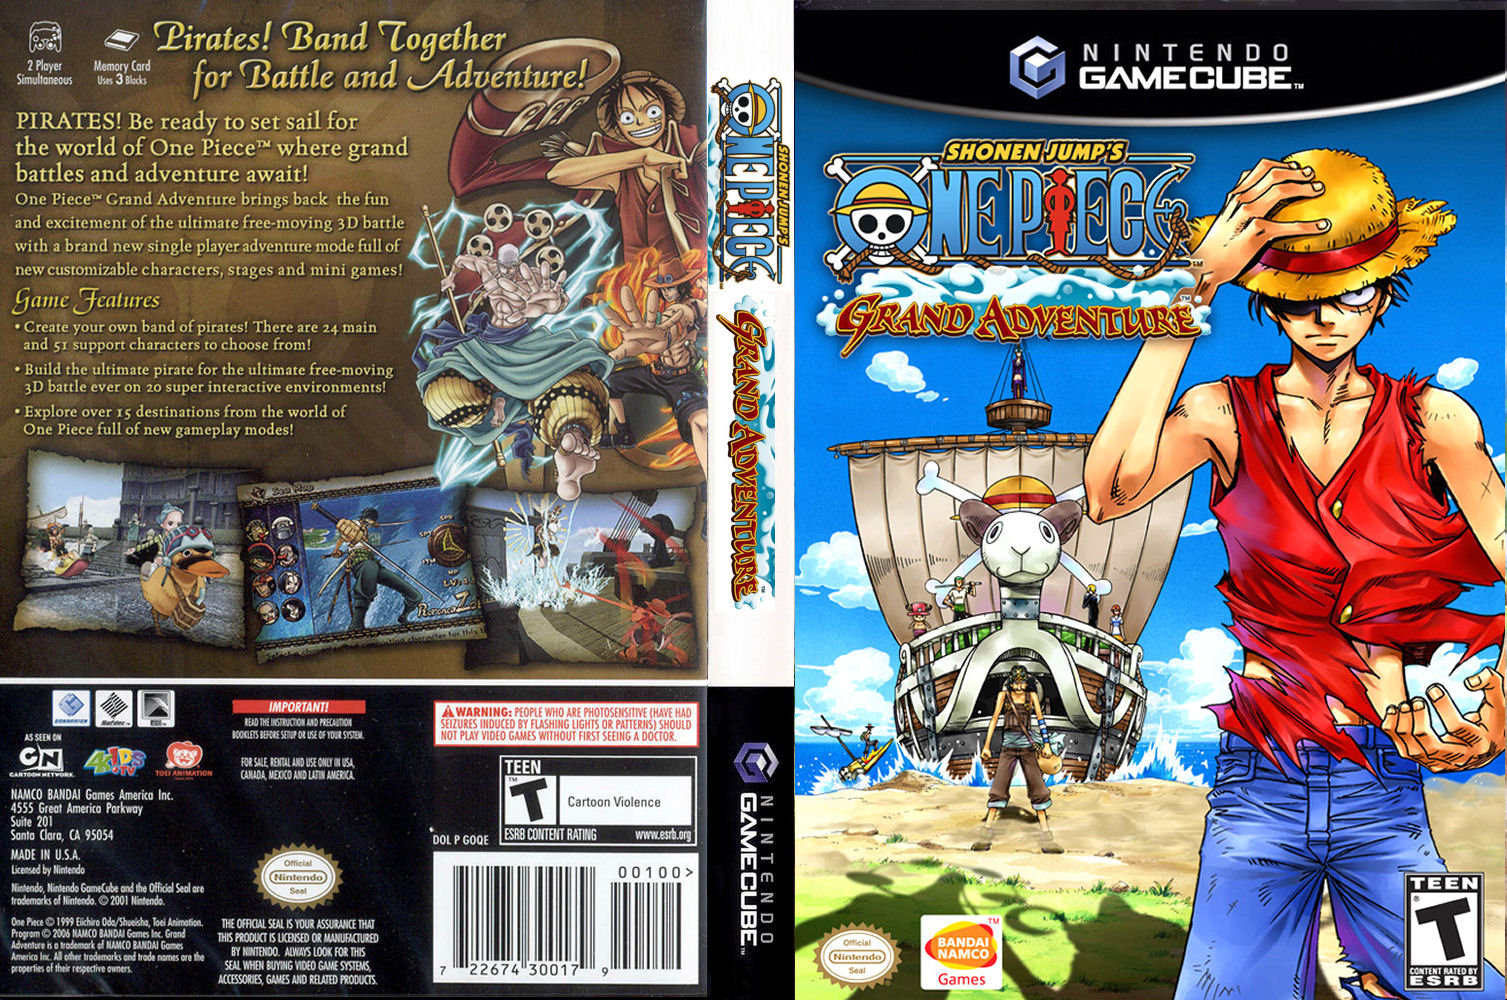 One Piece Grand Battle 2 Psx Game For Pc Highly Compressed 48mb